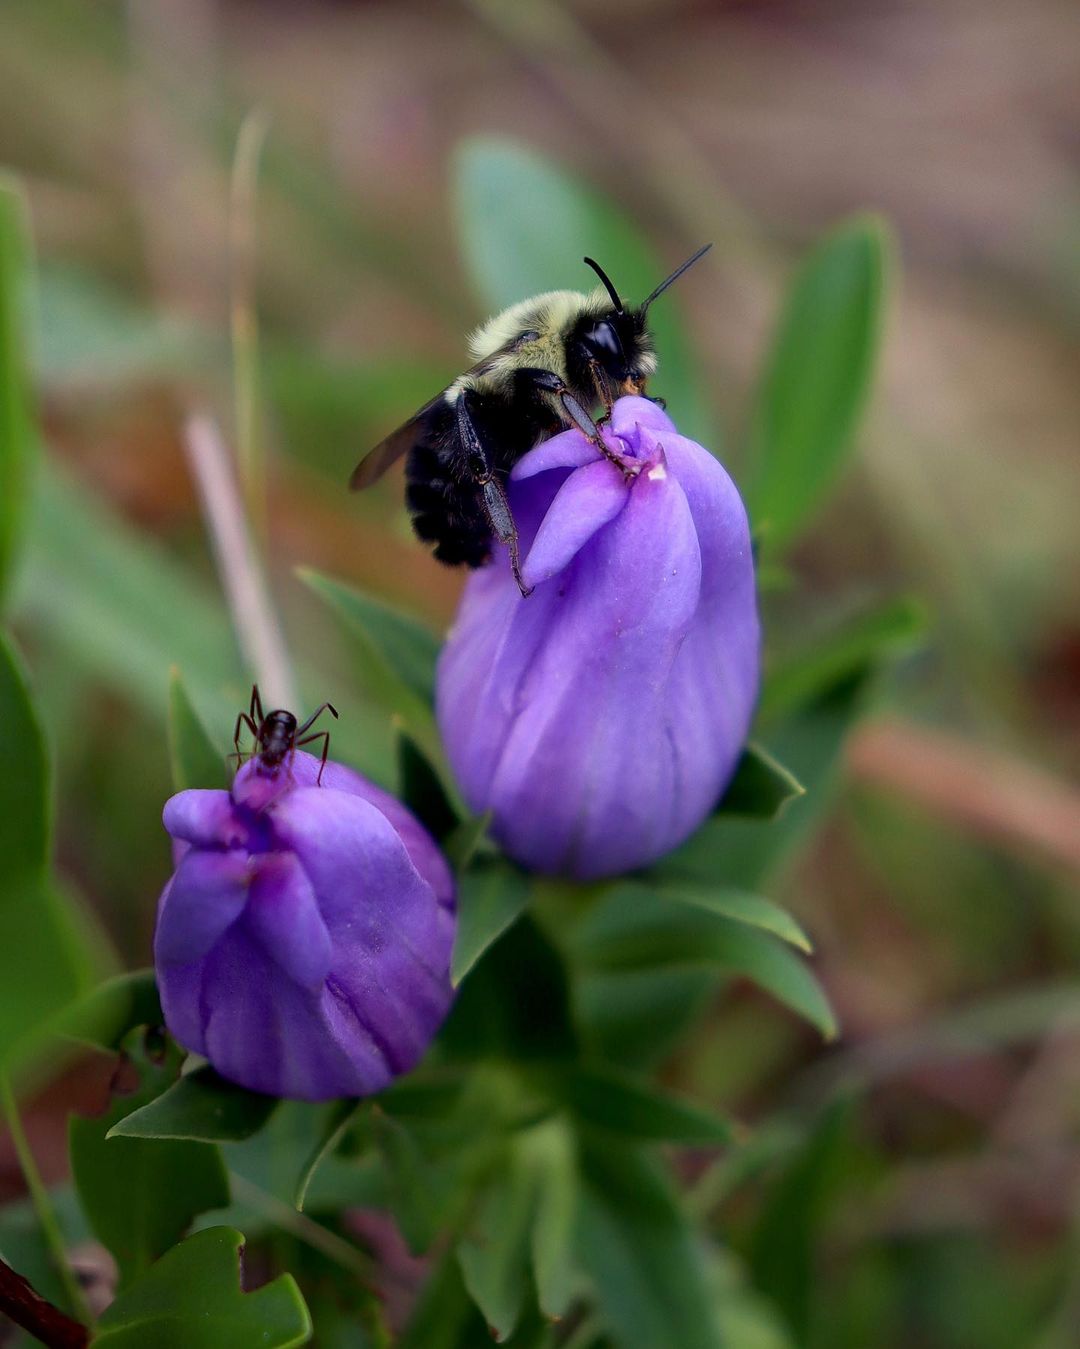 A bee on a purple Gentian flower in the grass.